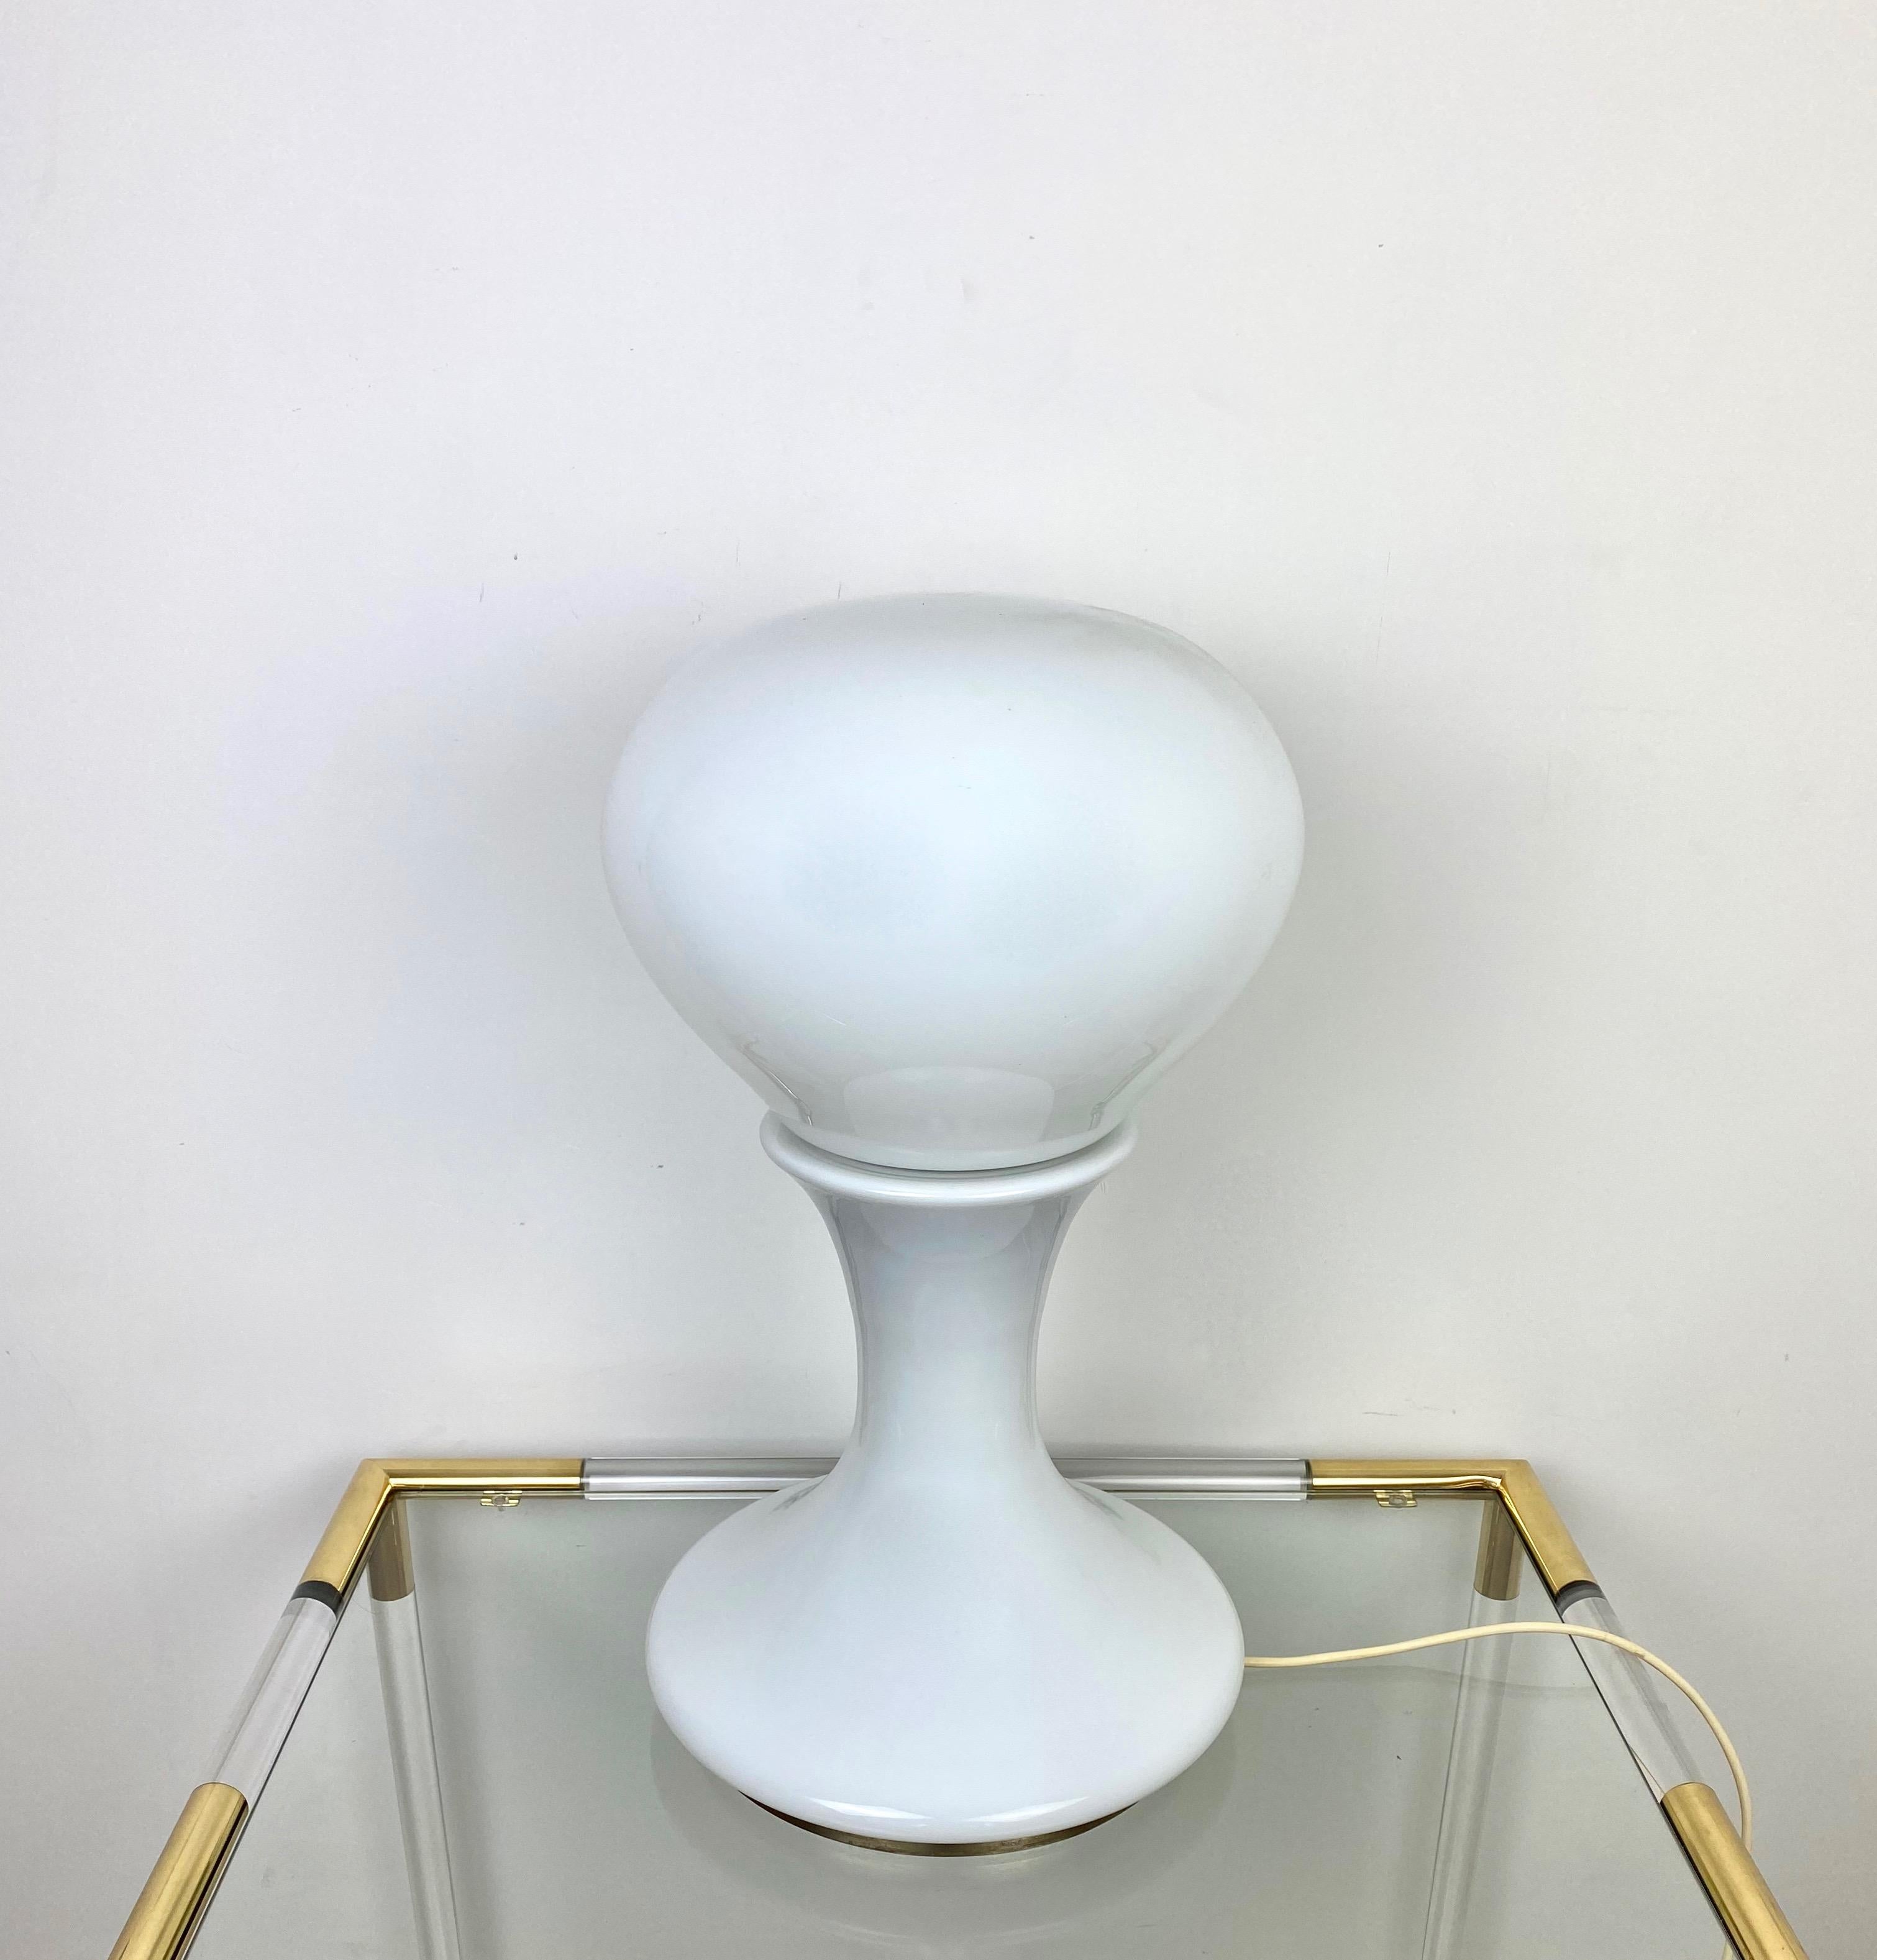 Big table lamp in Murano glass featuring two simultaneous lights. Made in Italy by the Italian designer Mazzega, design by Carlo Nason, circa 1970.